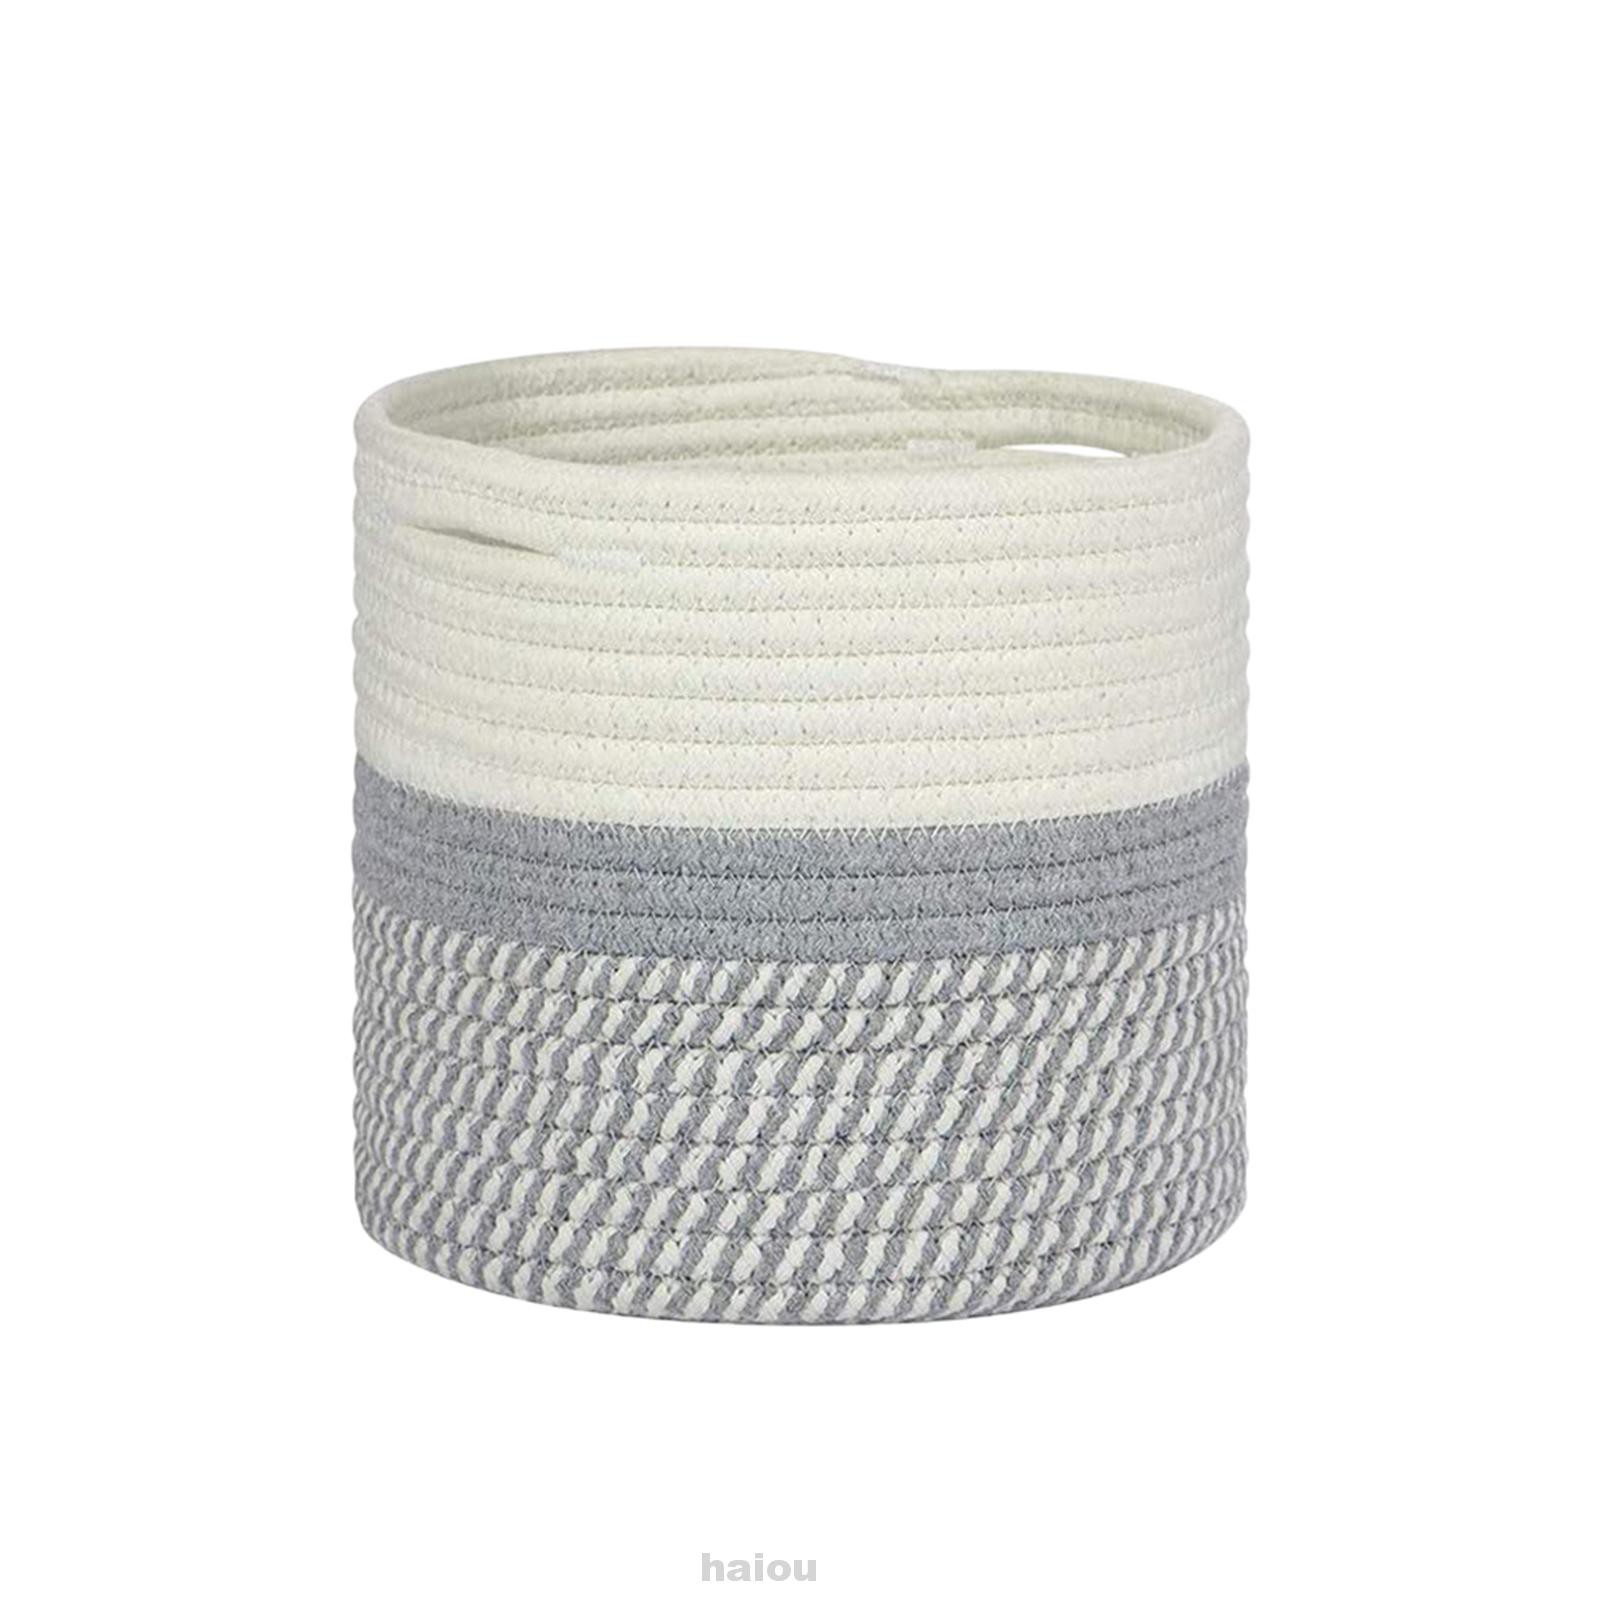 Living Room Floor Washable Home Decor Large Capacity Modern Cotton Rope For Flower Pot Woven Storage Basket